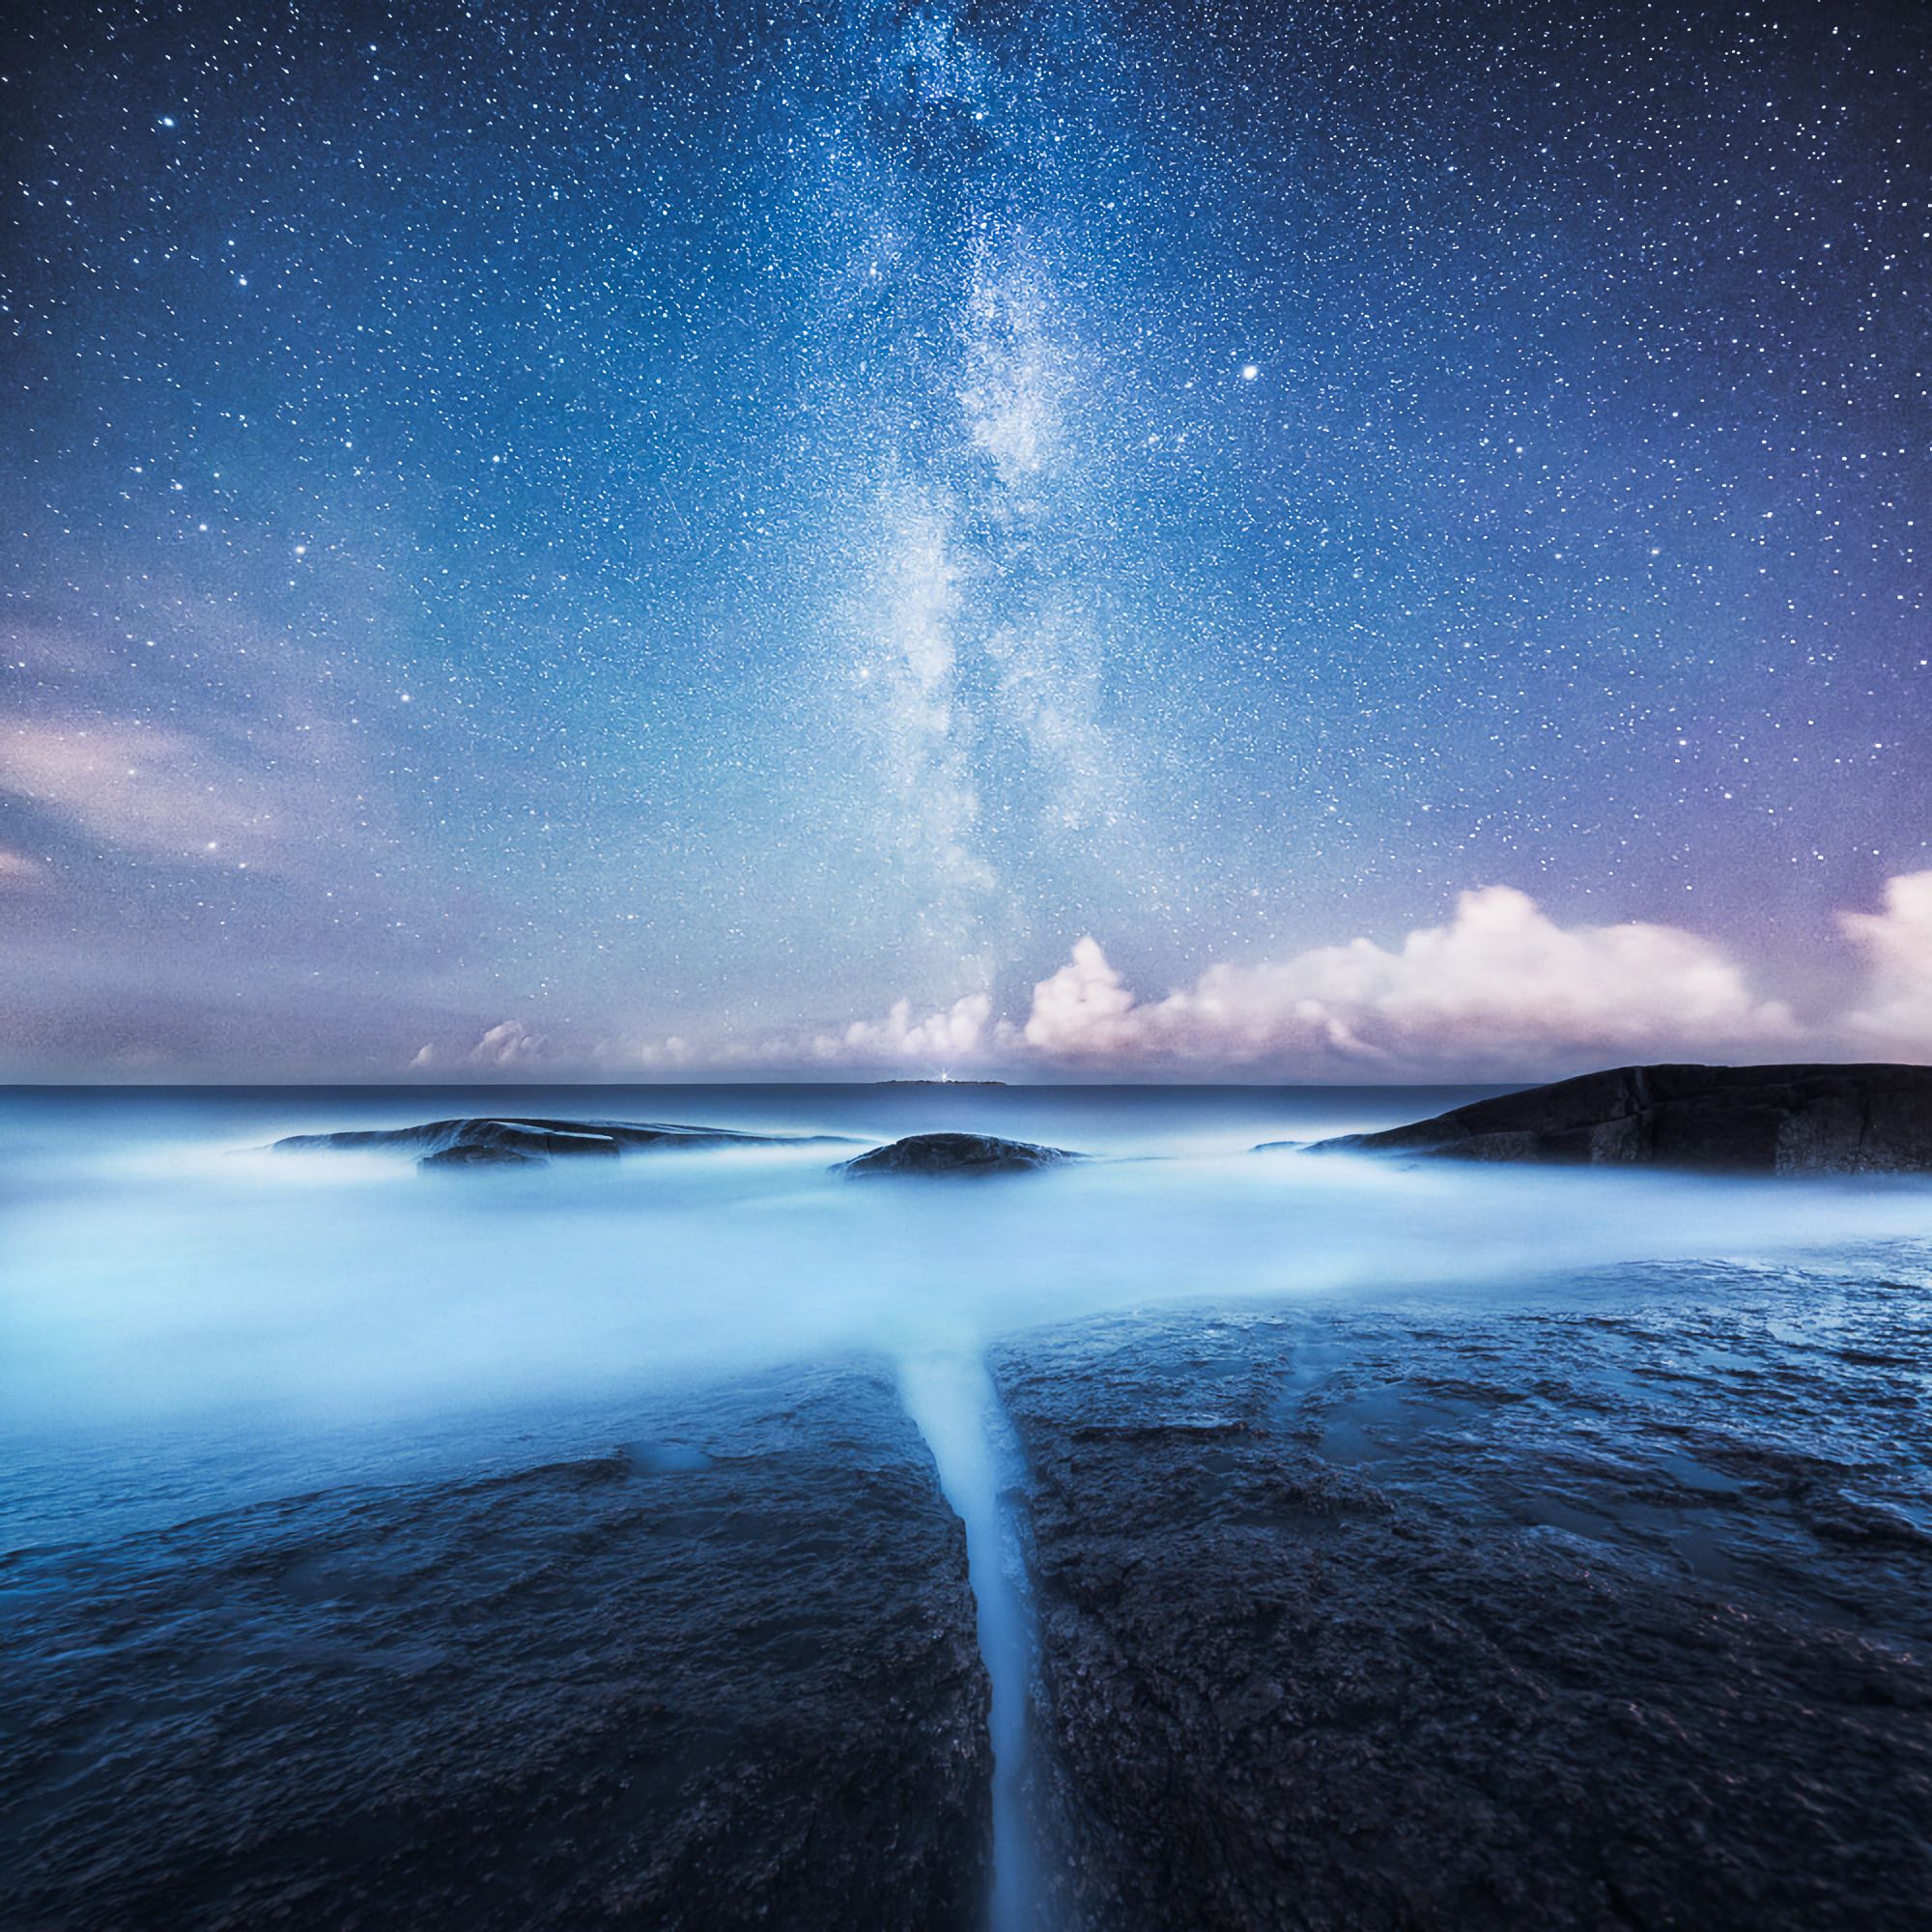 142907 download wallpaper starry sky, nature, night, shore, bank, milky way screensavers and pictures for free